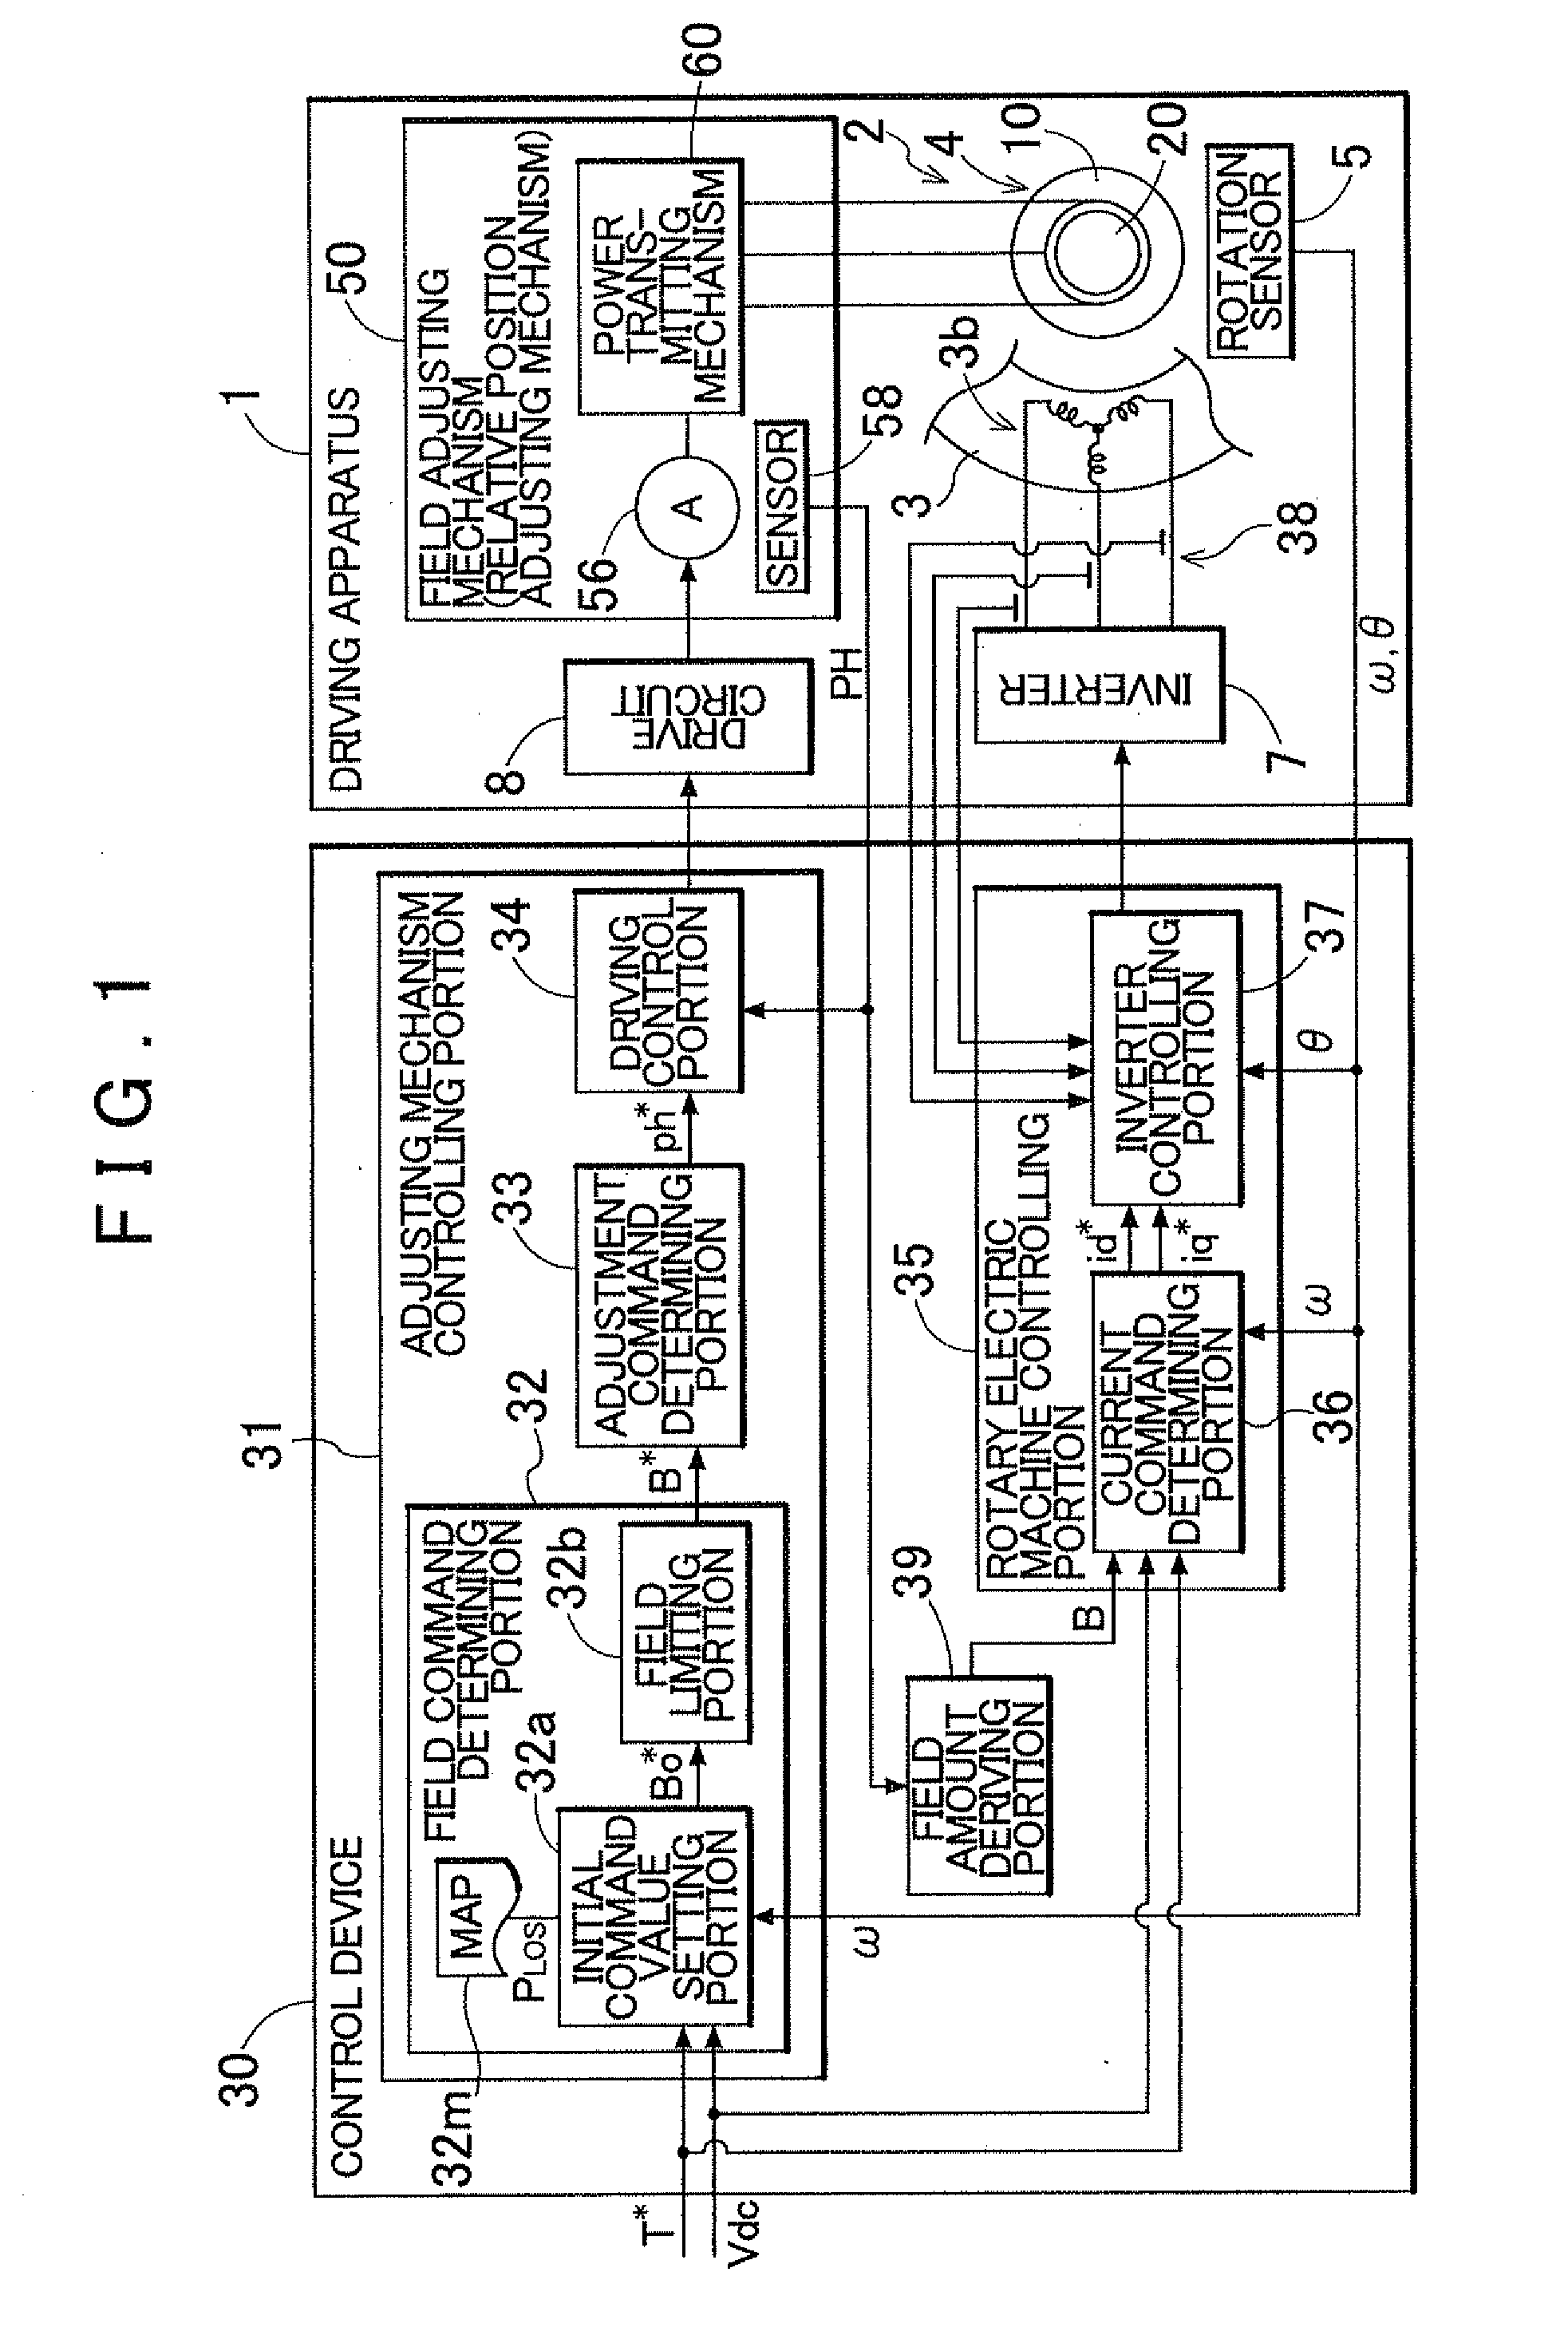 Control device of a driving apparatus